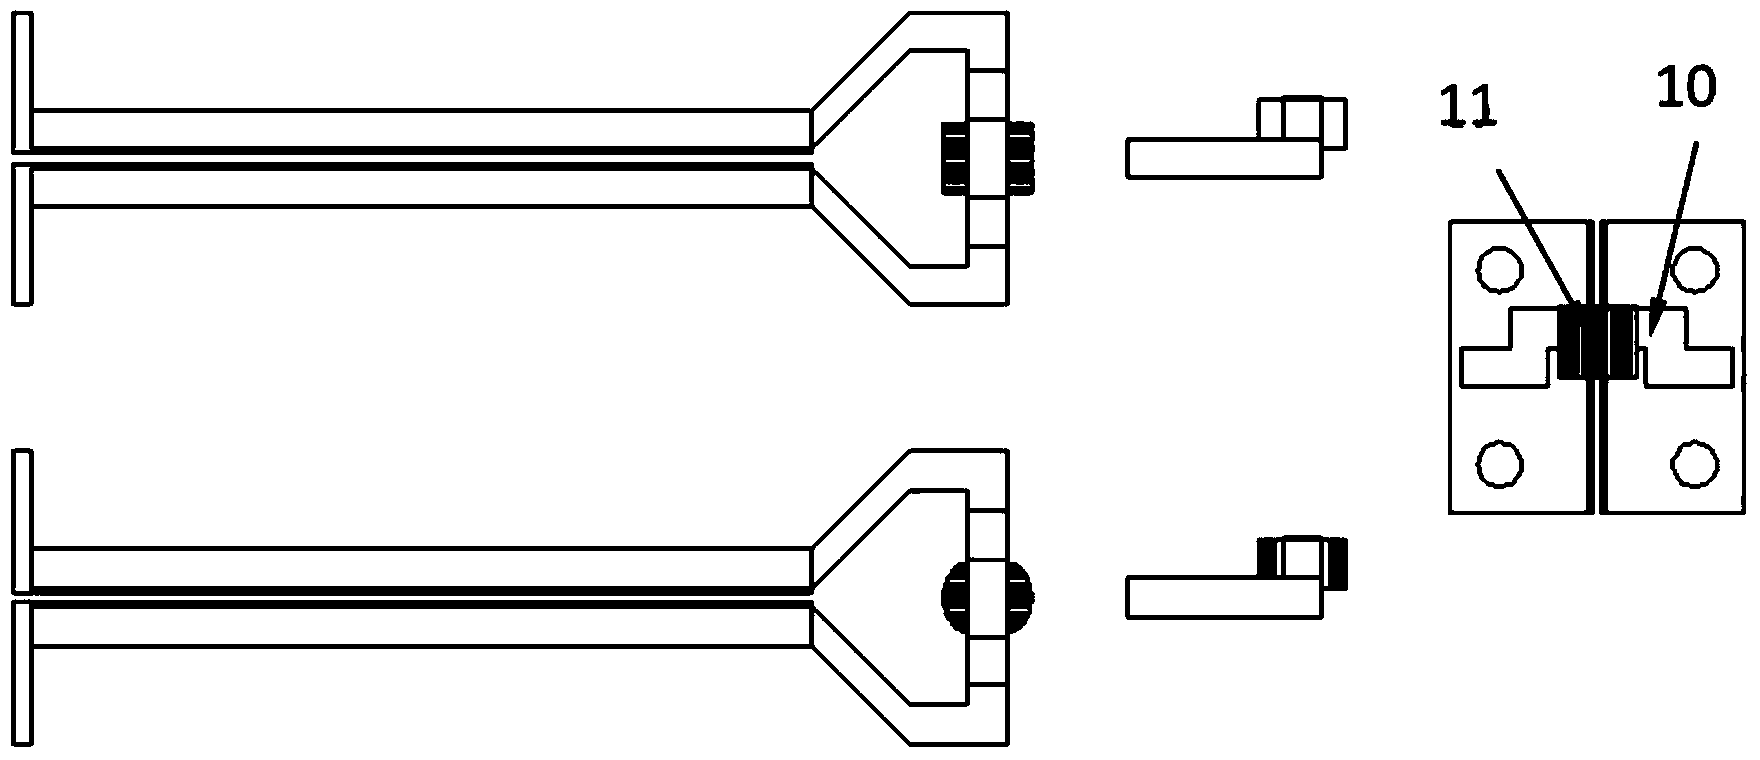 Self-piercing riveting device and method oriented to ultrahigh-strength steel and light metal